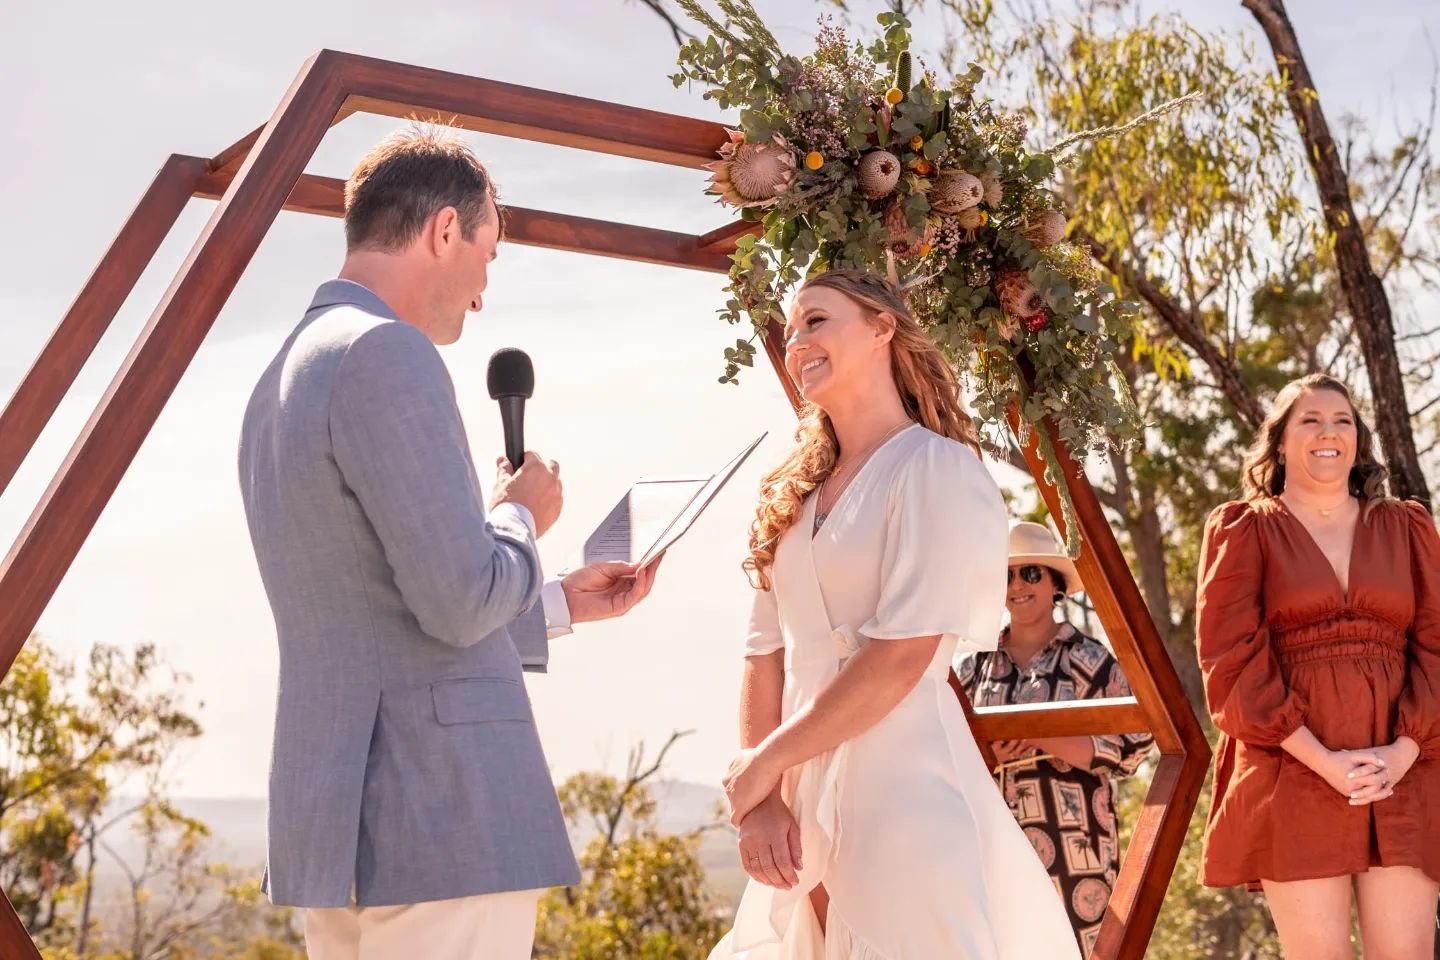 I don't often post images from the actual ceremony to instagram, but I had to make an exception for this one. I keep raving about it because it is actually that good! Views for days, dreamy sunsets and incredible native flora make this place so speci